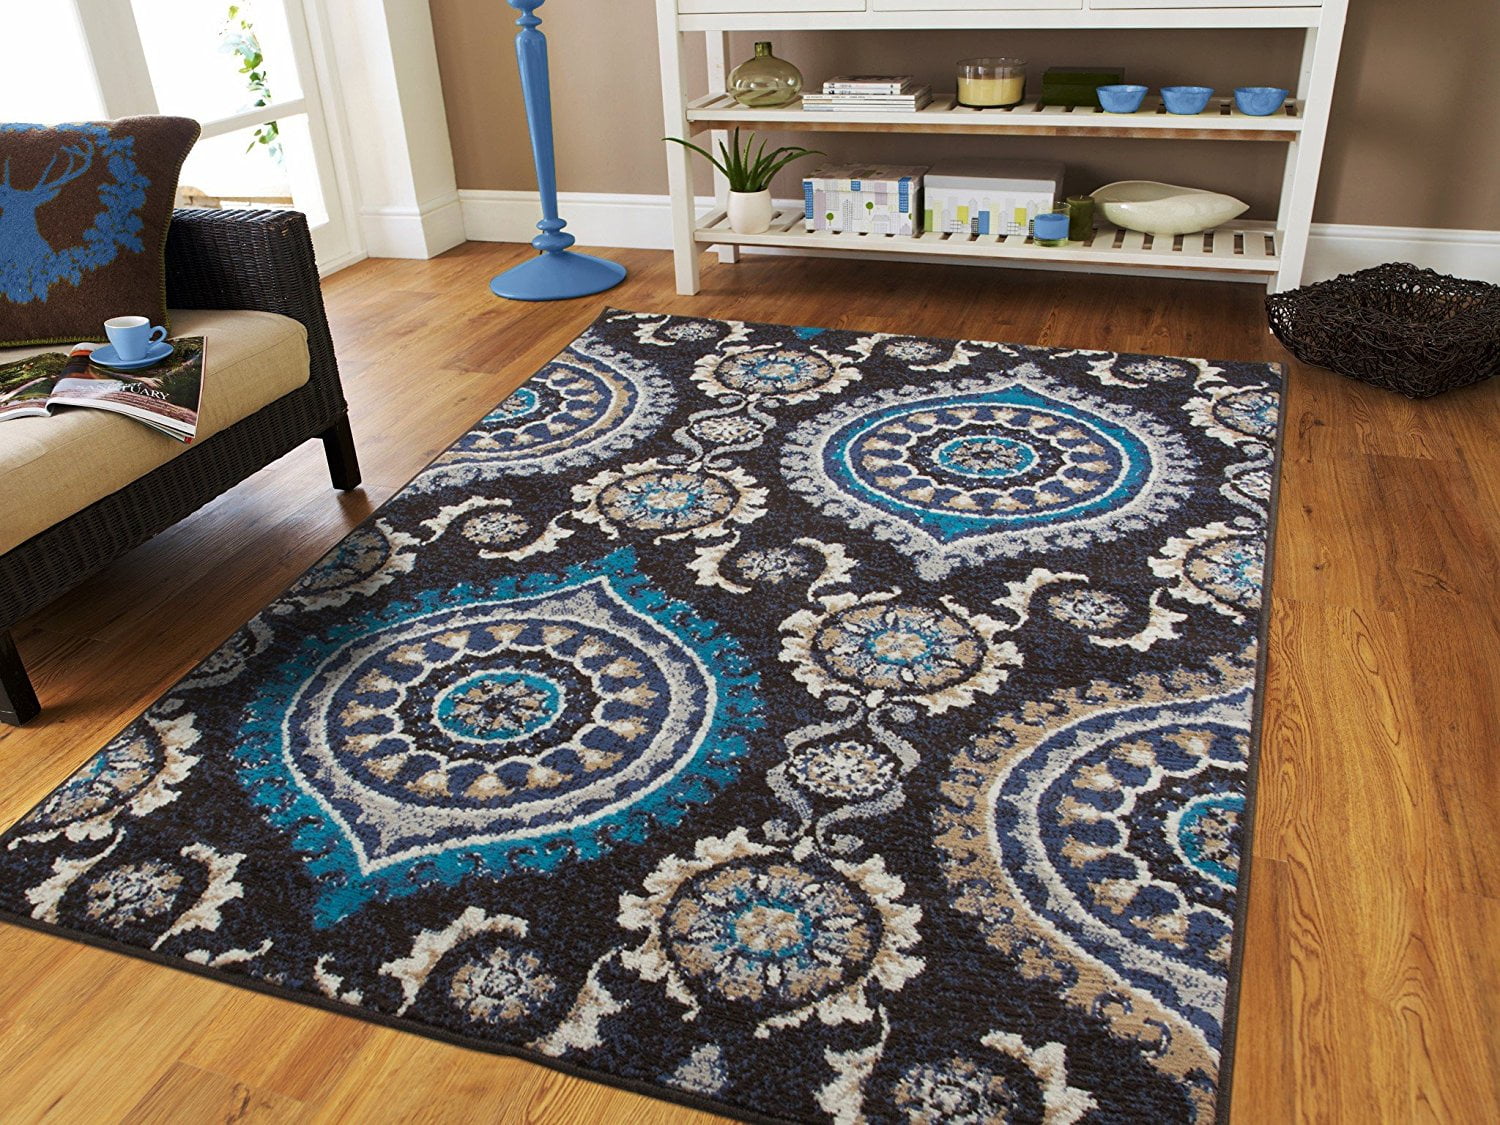 Stylish Long Hallway Runner Rug Small /Large Living Room Washable Carpet Runners 